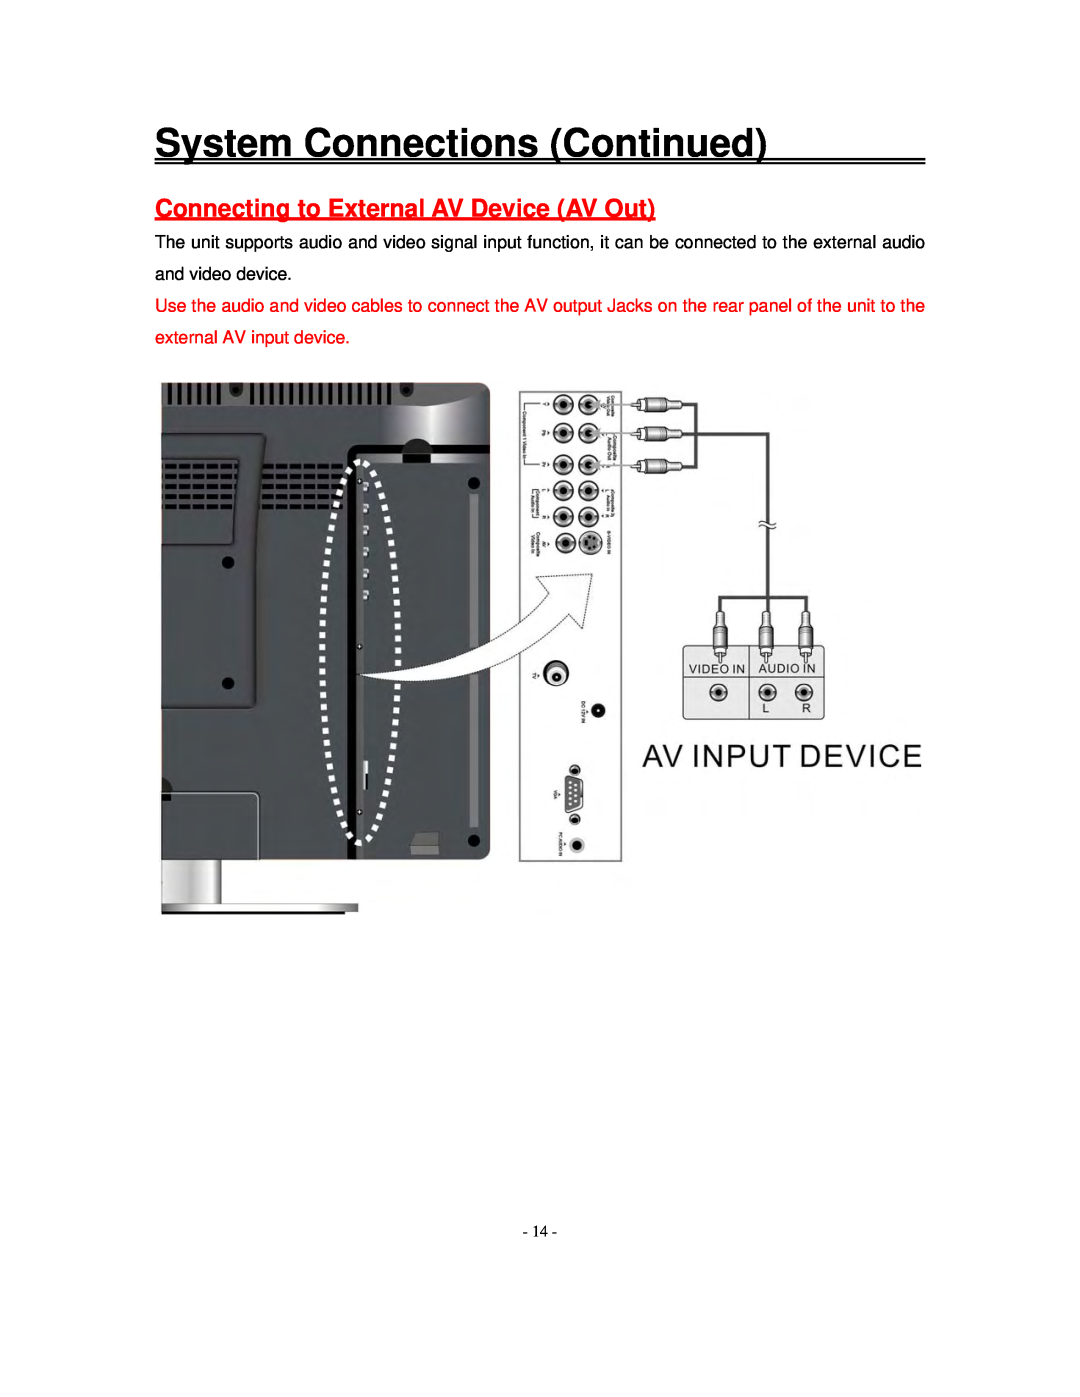 Polaroid FXM-1911C manual Connecting to External AV Device AV Out, System Connections Continued 